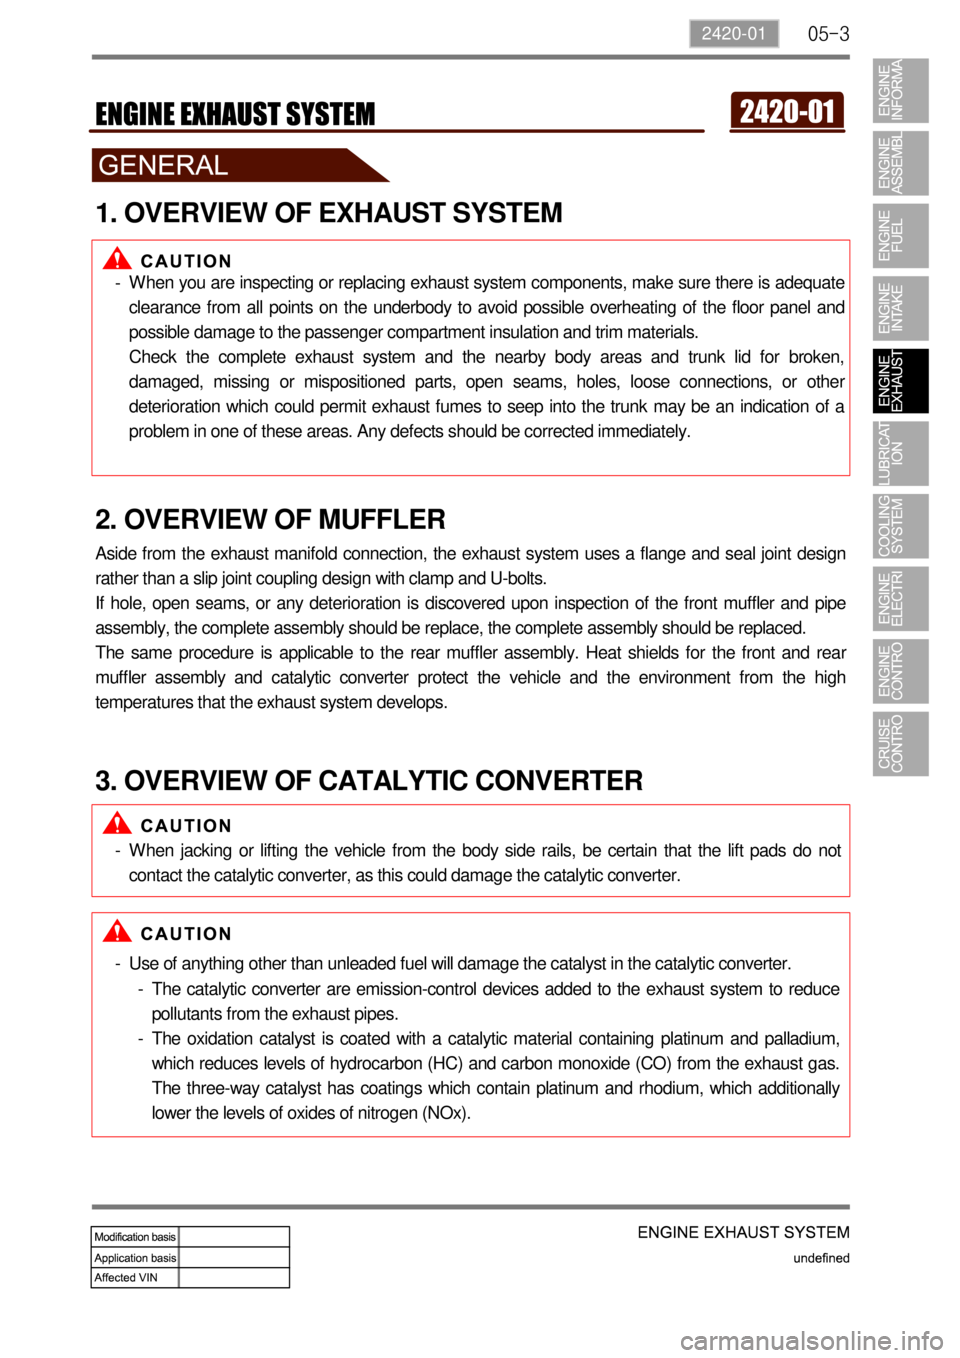 SSANGYONG TURISMO 2013  Service Manual 05-32420-01
1. OVERVIEW OF EXHAUST SYSTEM
When you are inspecting or replacing exhaust system components, make sure there is adequate 
clearance from all points on the underbody to avoid possible over